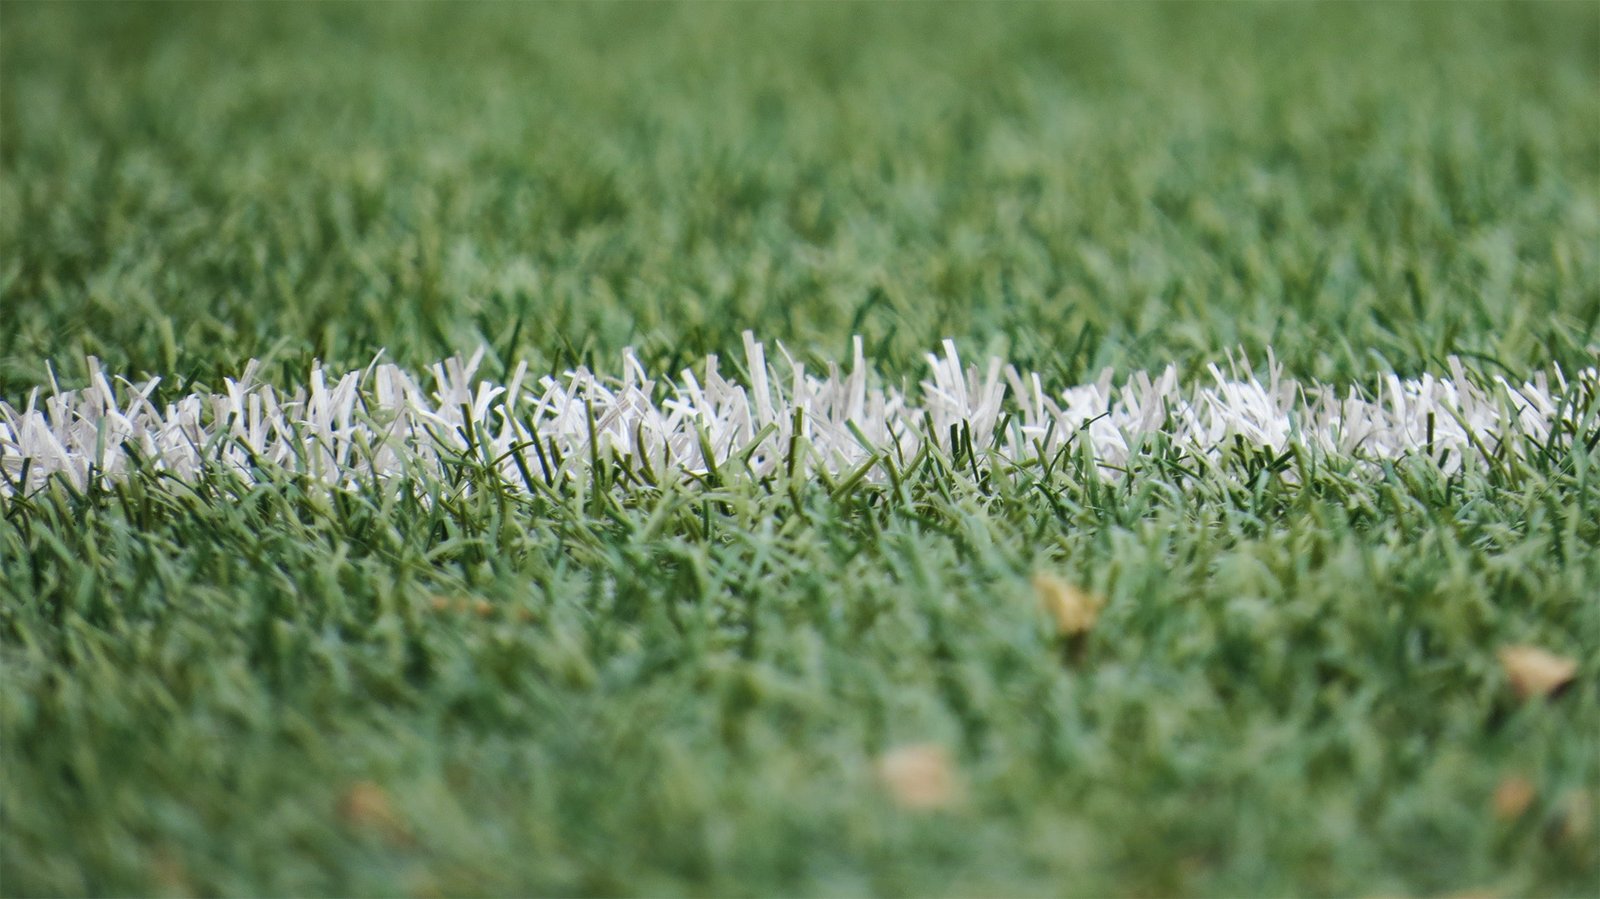 The FootBlog: How My Obsession with Football Hurt My Soul